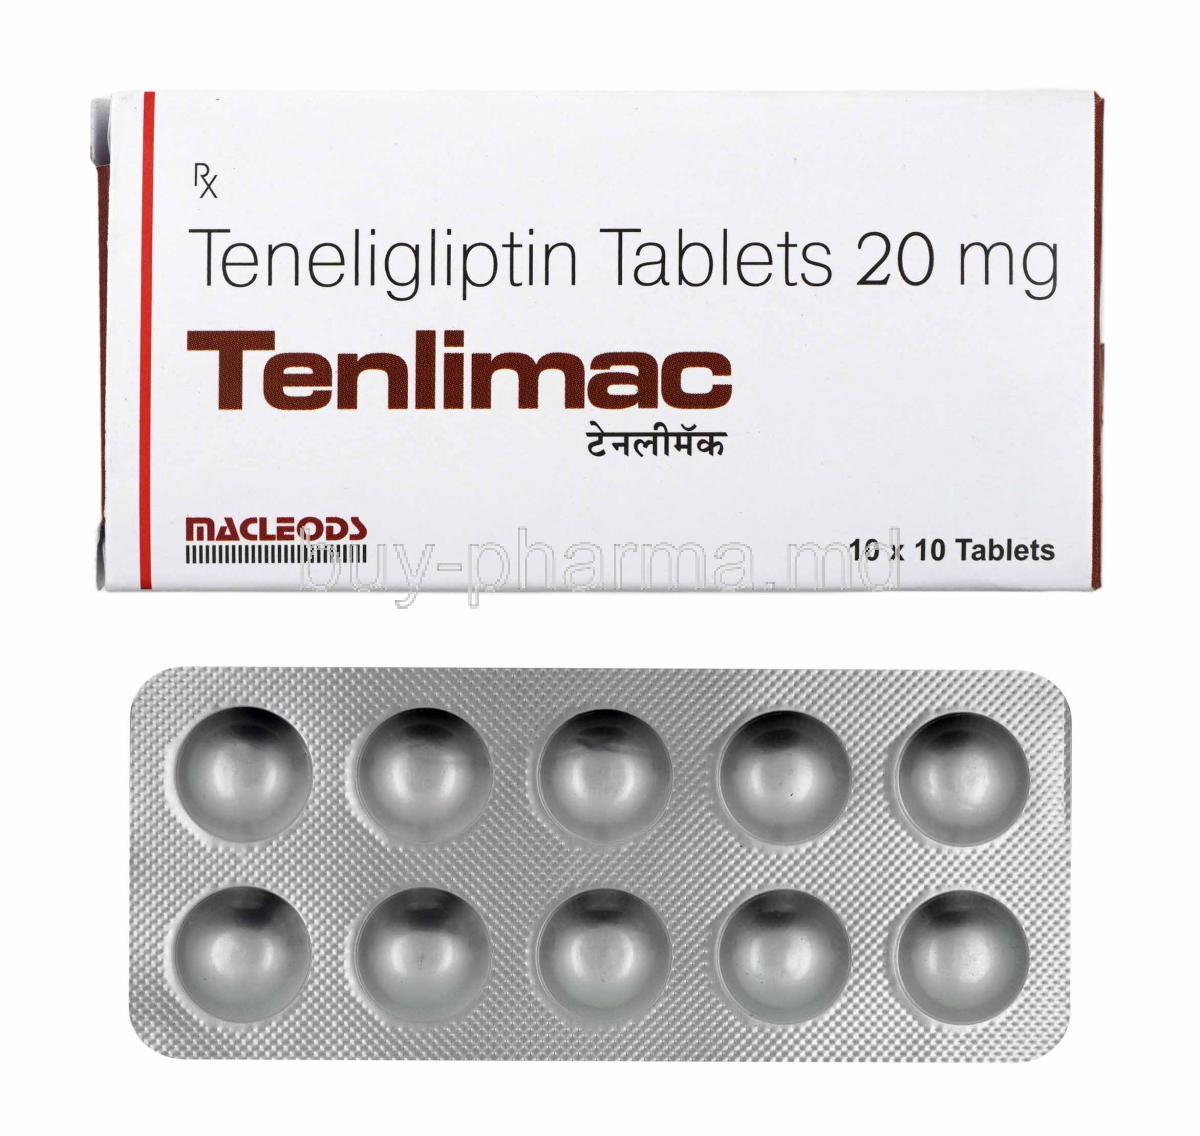 Tenlimac, Teneligliptin box and tablets